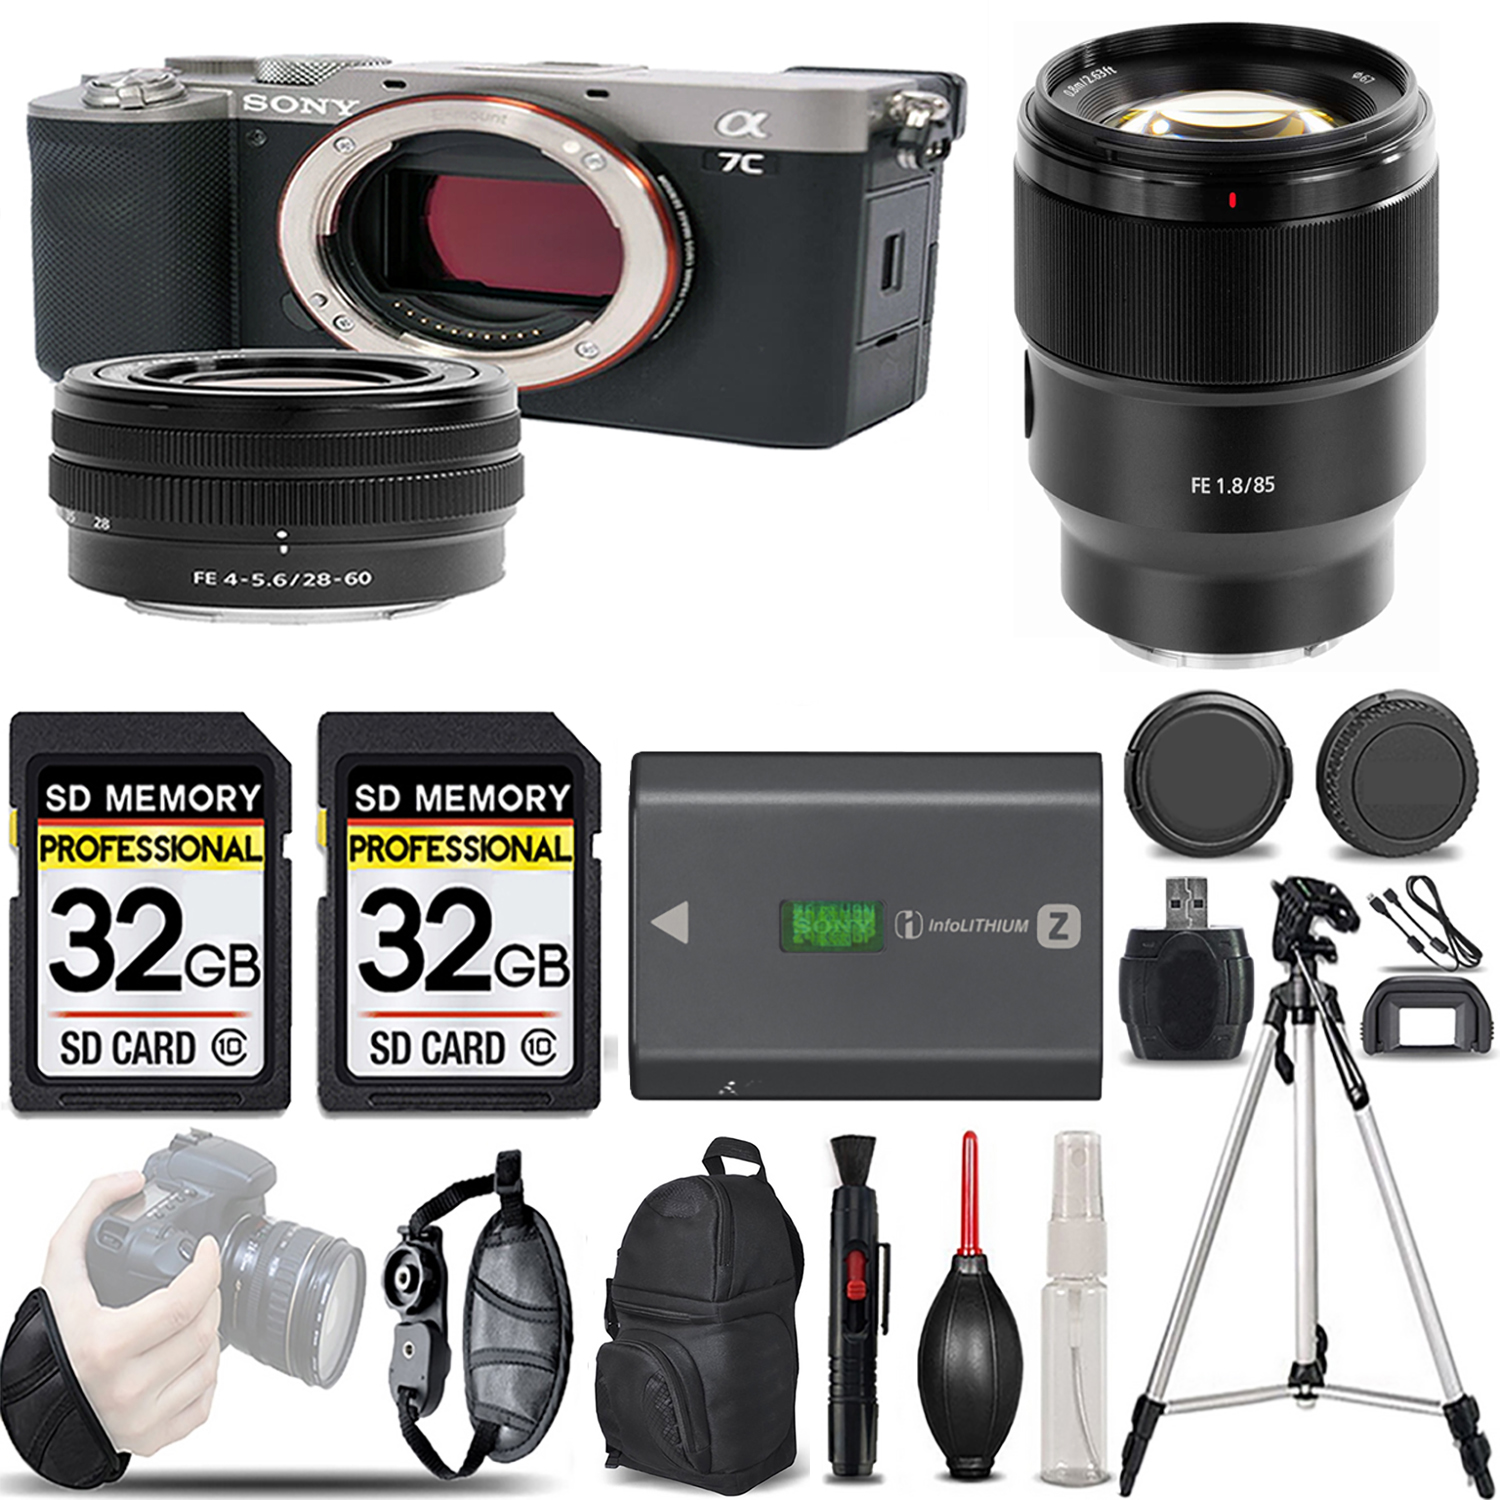 Alpha a7C Mirrorless Camera (Silver) + 28-60mm Lens + 85mm f/1.8 Lens - LOADED KIT *FREE SHIPPING*